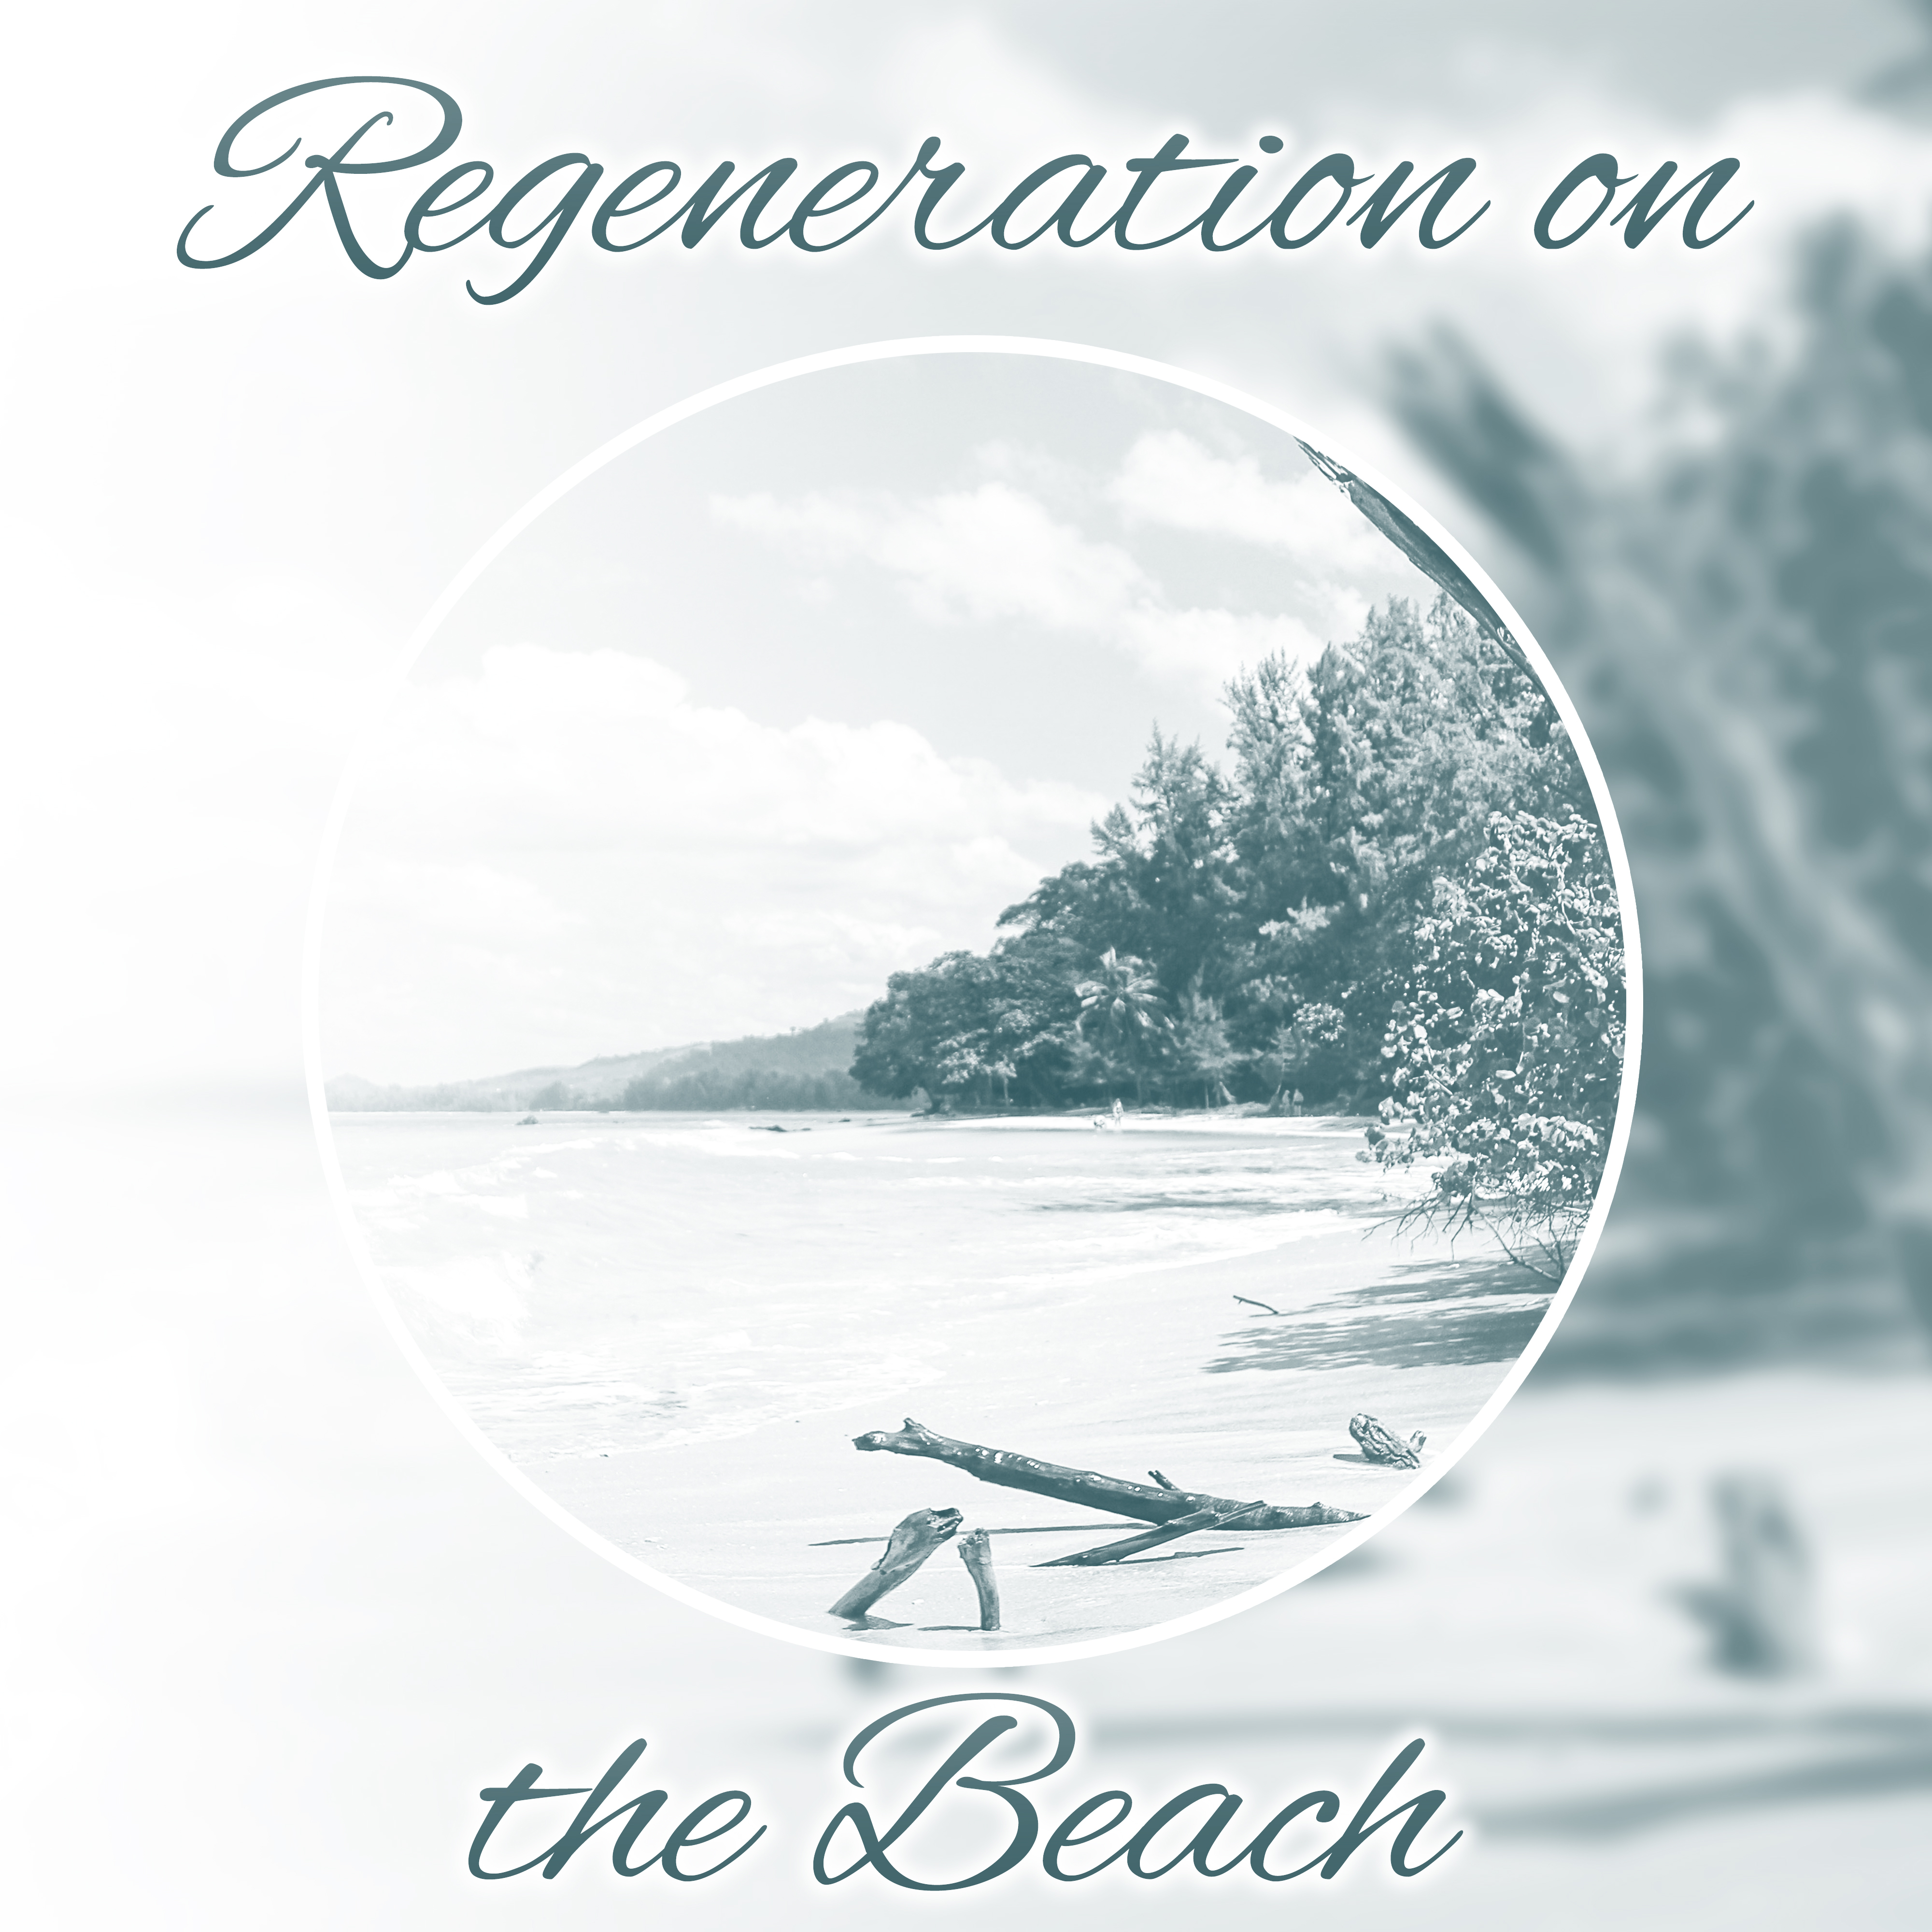 Regeneration on the Beach – Hot Summer, Relax Under Palms, Ibiza Lounge, Summertime, Tropical Chill Out Music